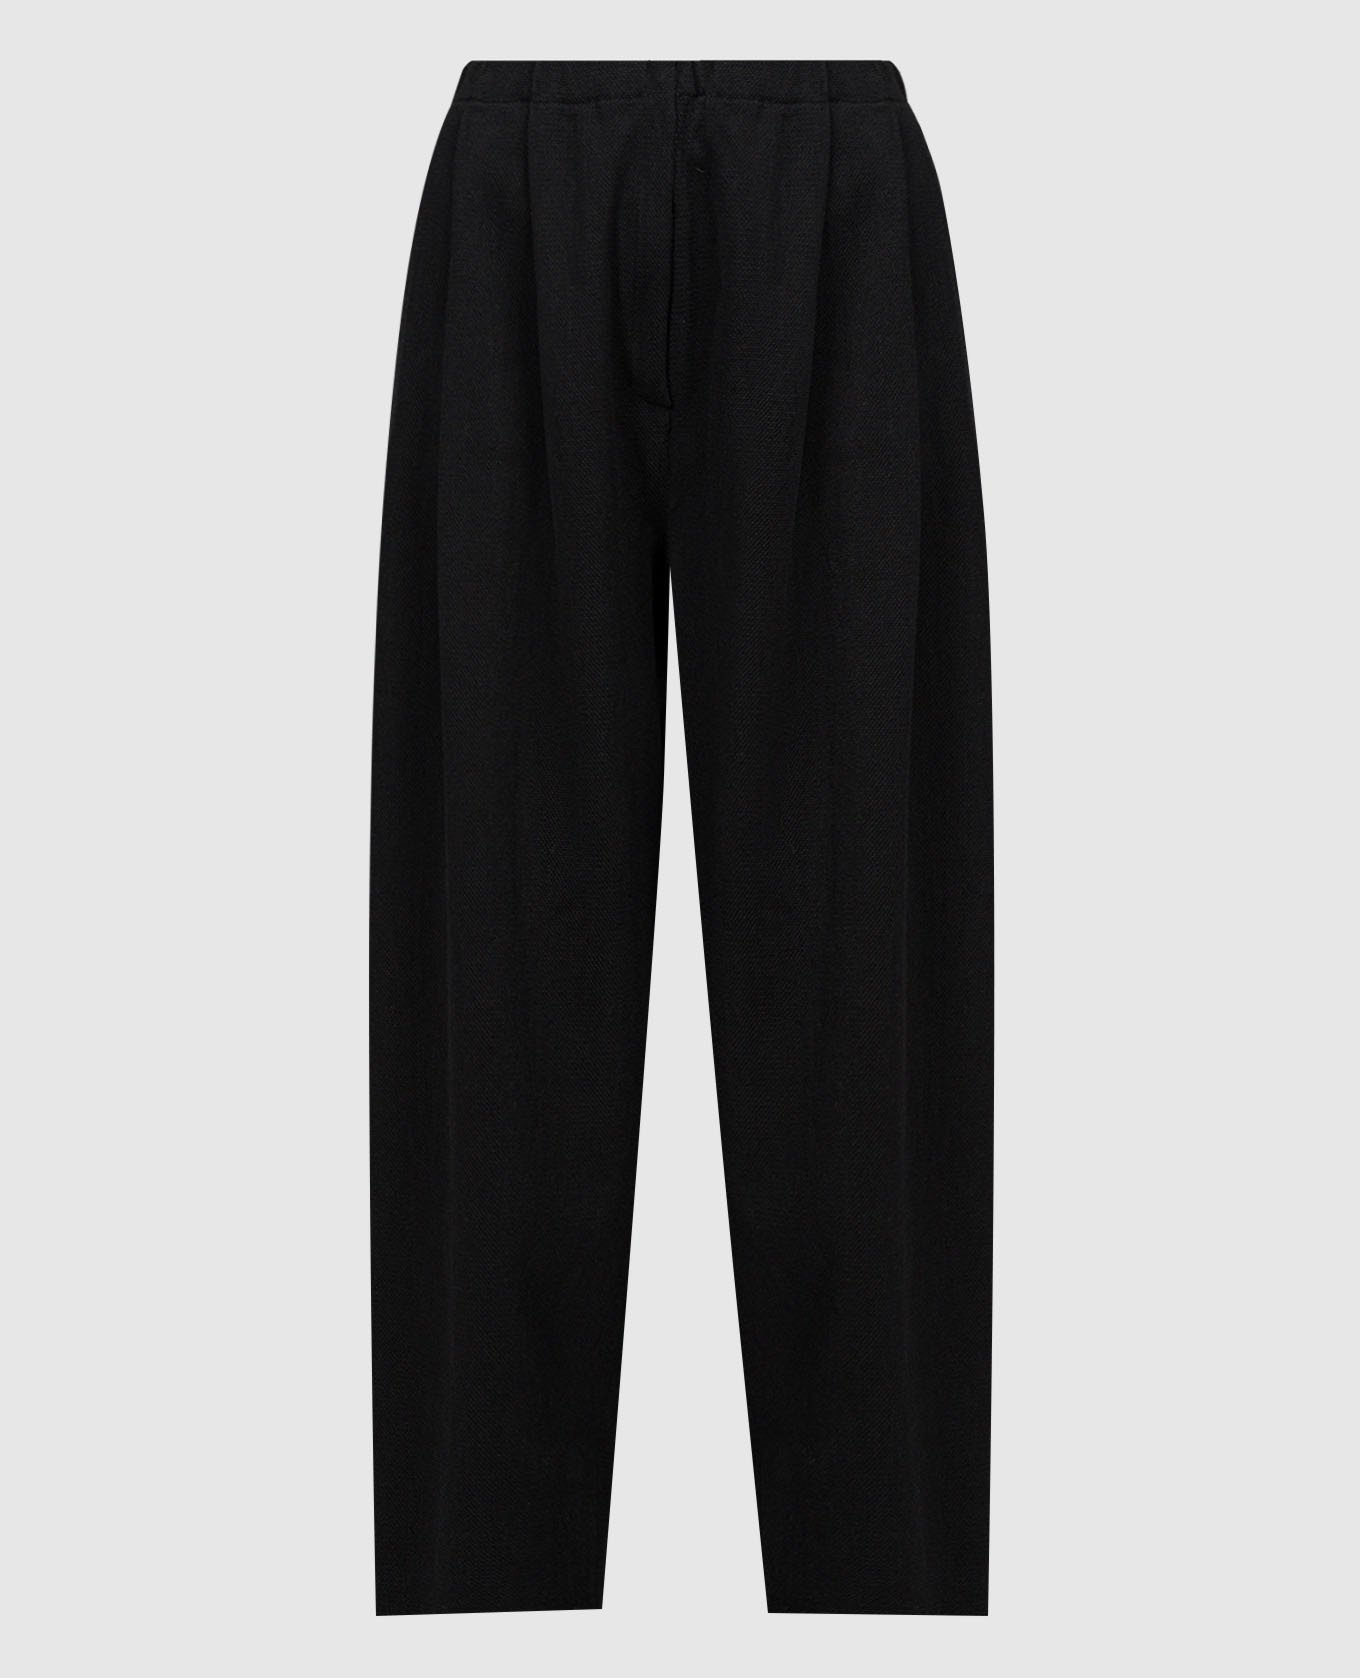 Black pants with linen, silk and cashmere